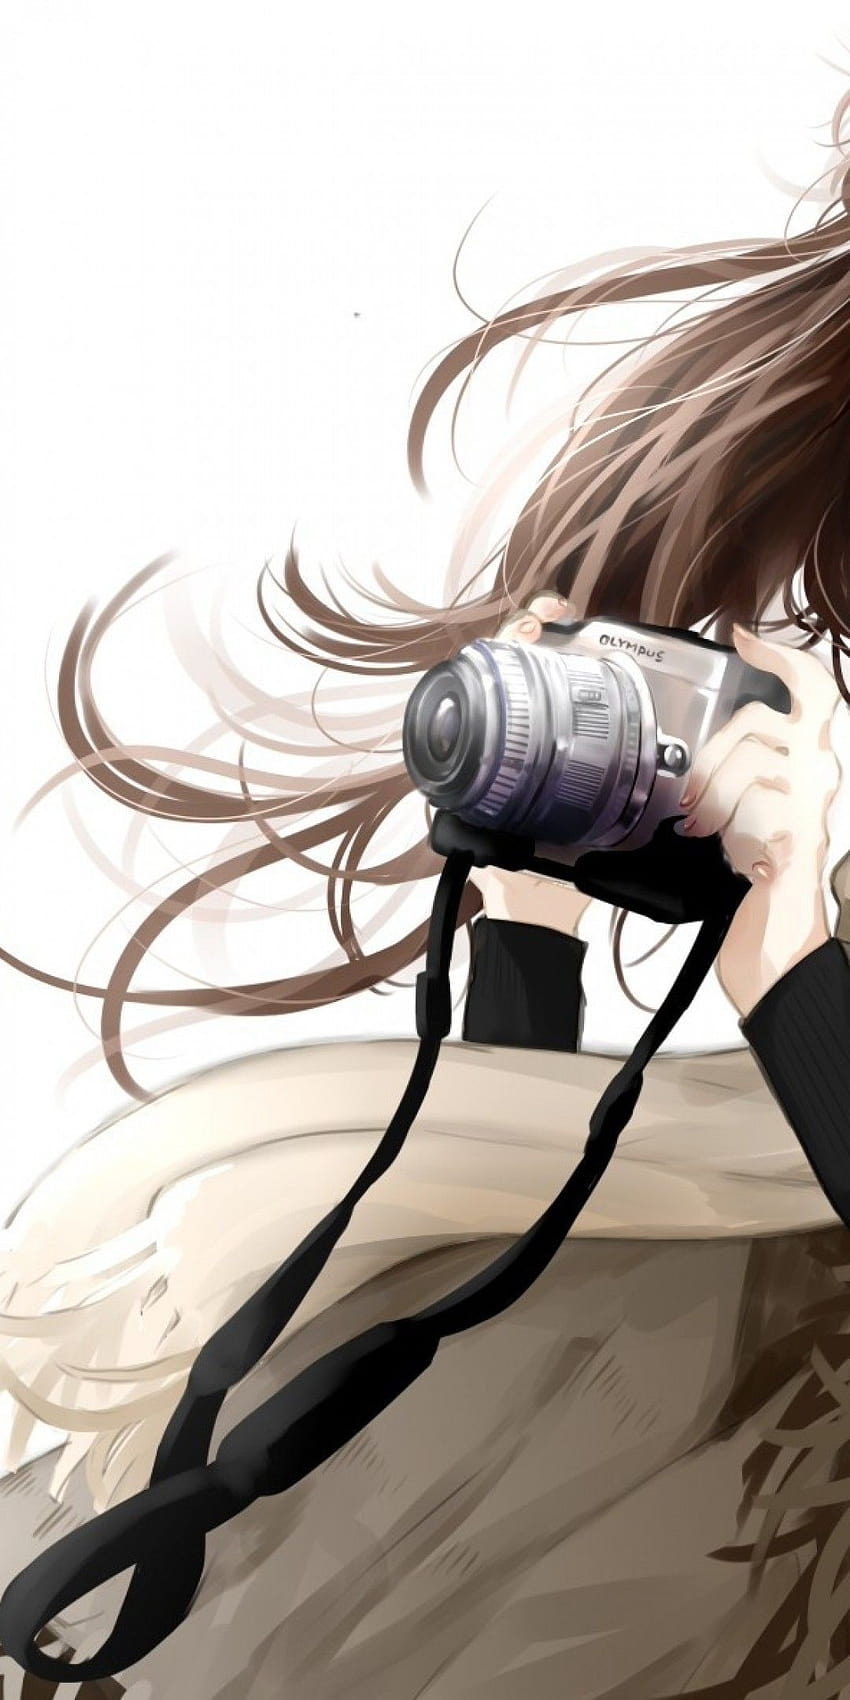 New Japanese Anime to Feature Ultra Realistic Canon Cameras | PetaPixel